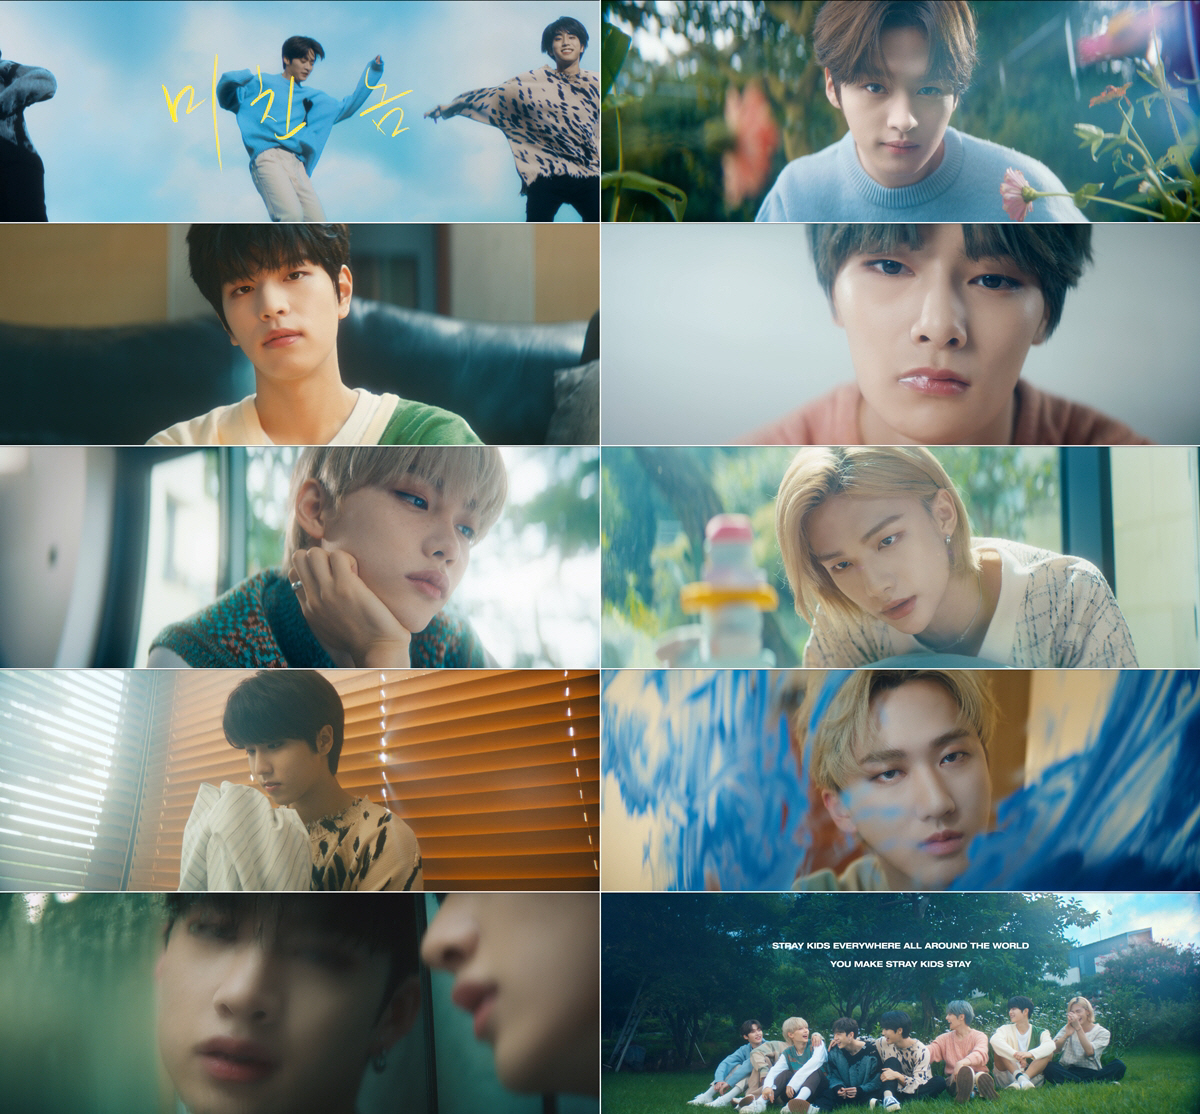 Stray Kids first released the song Crazy Guys (Ex) from their new album IN Lives (Life).On the official SNS channel at 0:00 on the 5th, the video Stray Kids  UNVEIL: TRACK Crazy Guy (Ex) (Stray Kids  Unvale: Tracks Crazy Guy (Ex)) was posted.This video, like a youthful movie, caught the attention with a lyrical melody that contradicts the cool atmosphere.The sound of birds coming from nature, the sound of the wind brushing against the leaves, led to sweet guitar Laying.Bang Chan, Reno, Changbin, Hyunjin, Han, Felix, Seungmin, and Aien jumped over the clear sky with a bright smile.The members of the video end stared at the camera with a serious expression that was different from the beginning and expressed the lonely feelings that were empty.Especially in each space, the shape surrounded by white cloth was staring somewhere and I was curious.The new song The Crazy Man (Ex) is a song about regret that the mind of the opponent cooled down and chose to parting, but missed the relationship and faced it.The teams production group, Three Lacha (3RACHA), members Bang Chan and Changbin, wrote and composed.They proved their wide range of musical capabilities by Laying addictive songs as well as emotional genres.Stray Kids is boosting the comeback atmosphere with signature teaching content UNVEIL: TRACK (Unvale: Tracks).UNVEIL: TRACK is a pre-released video of some of the songs, and you can feel the confidence of Stray Kids, who has been well known as self-produced group.They started with No (Any) through UNVEIL: TRACK, and then We Go (Bang Chan, Changbin, Han), Wow (Reno, Hyunjin, Felix), My Universe (Seungmin, Ayen Feat).Changbin) followed by Crazy Guy (Ex) with a total of five songs.Meanwhile, Maramat genre pioneer Stray Kids releases the repackaged album IN Life from their regular 1st album GO-saeng (high school) on September 14.If you want to continue to enjoy the excitement of your previous work The God Menu (The New Menu) with the title song Back Door (The Back Door), you will send an invitation to listeners to come in and Lay with you.The expectation of global K-pop fans is gathering in the new news of Stray Kids, which will properly emit the essence of Marathon genre.